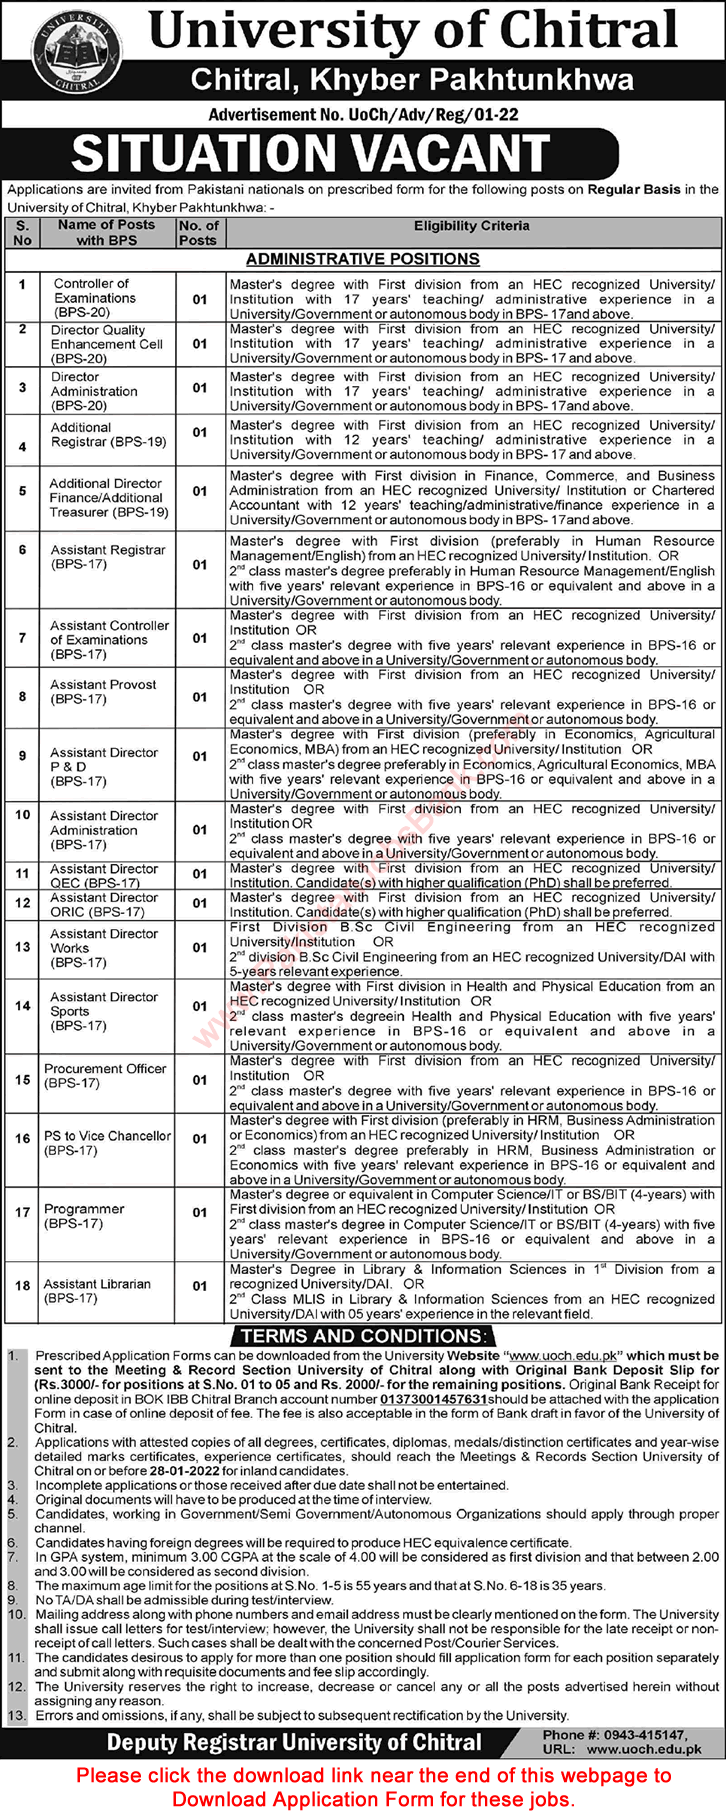 University of Chitral Jobs 2022 Application Form Assistant Directors & Others Latest